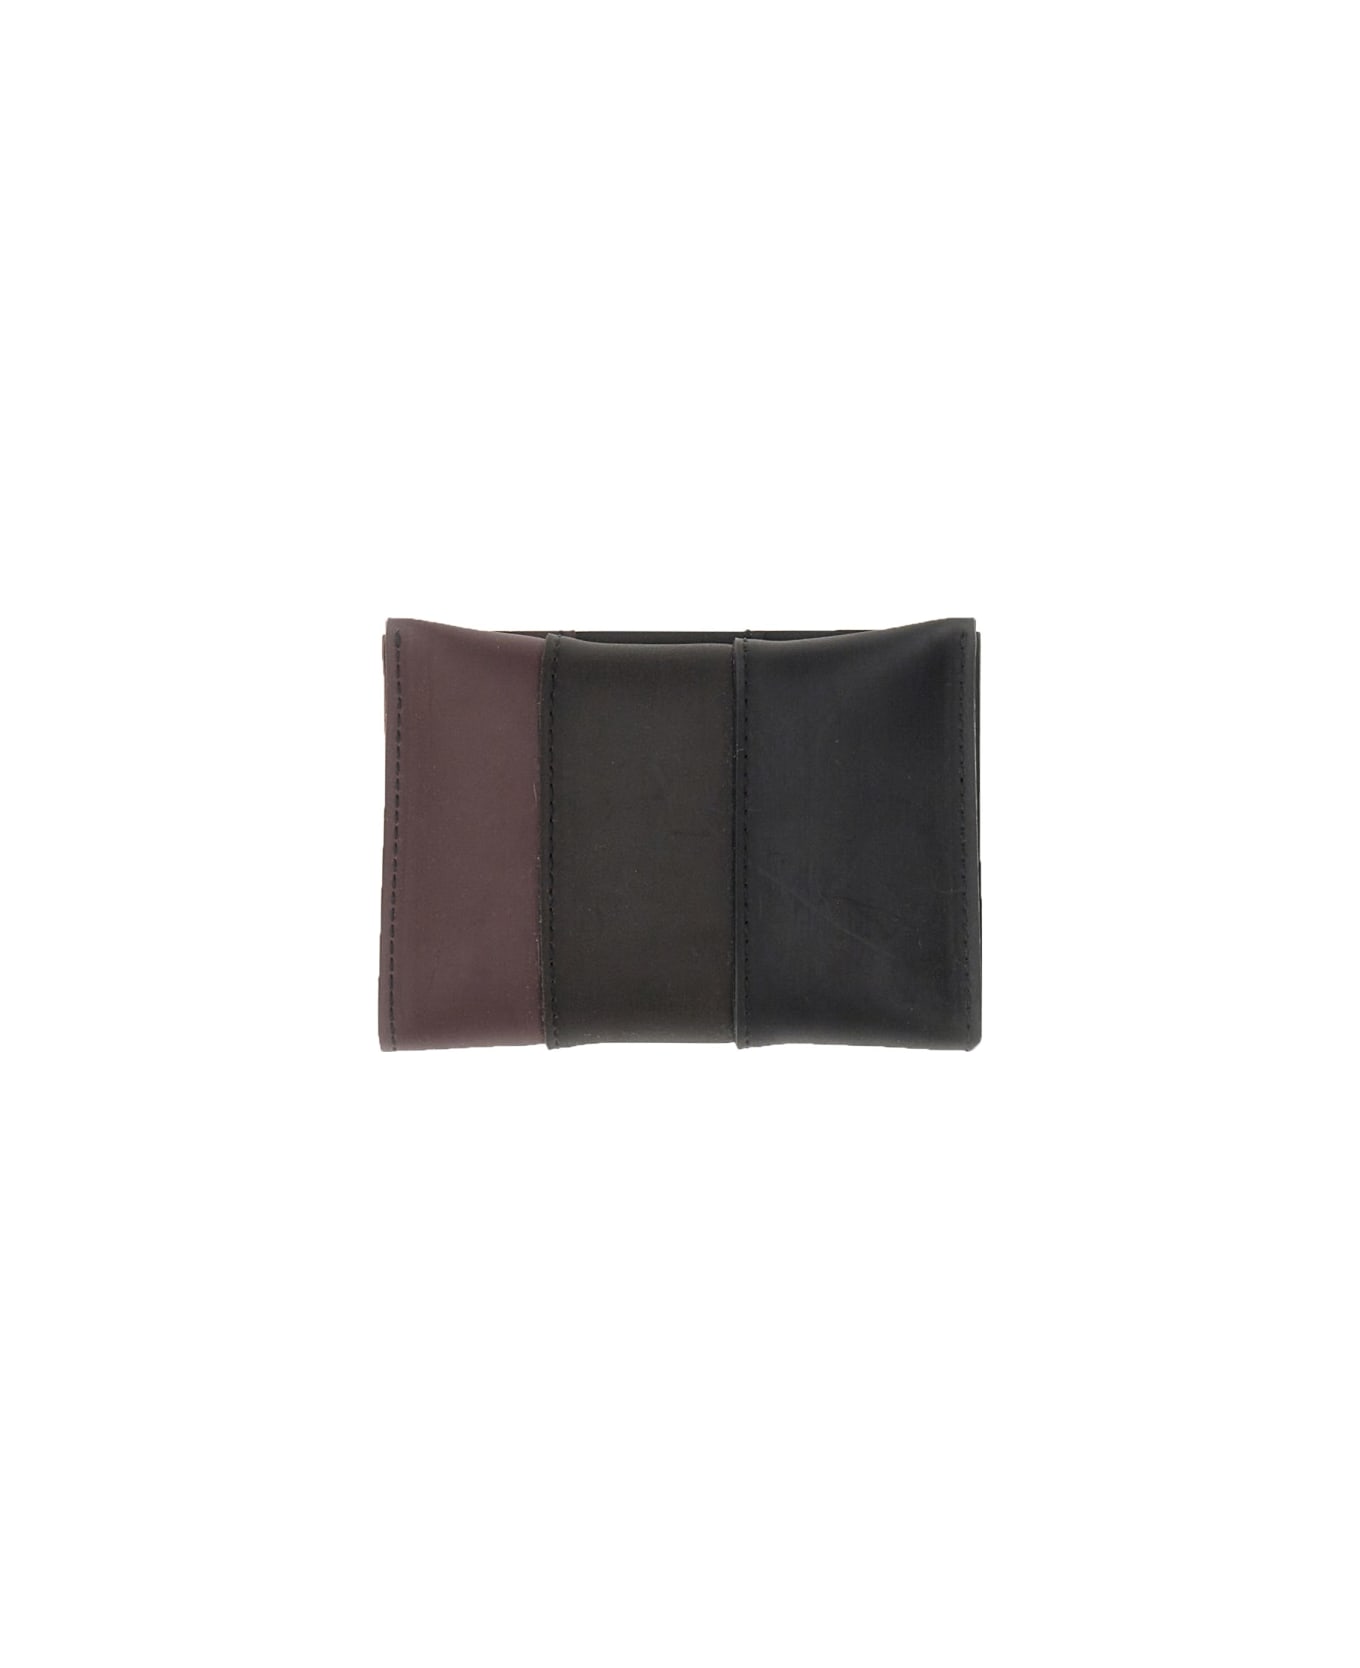 Sunnei Parallelepiped Pudding Wallet - BLACK